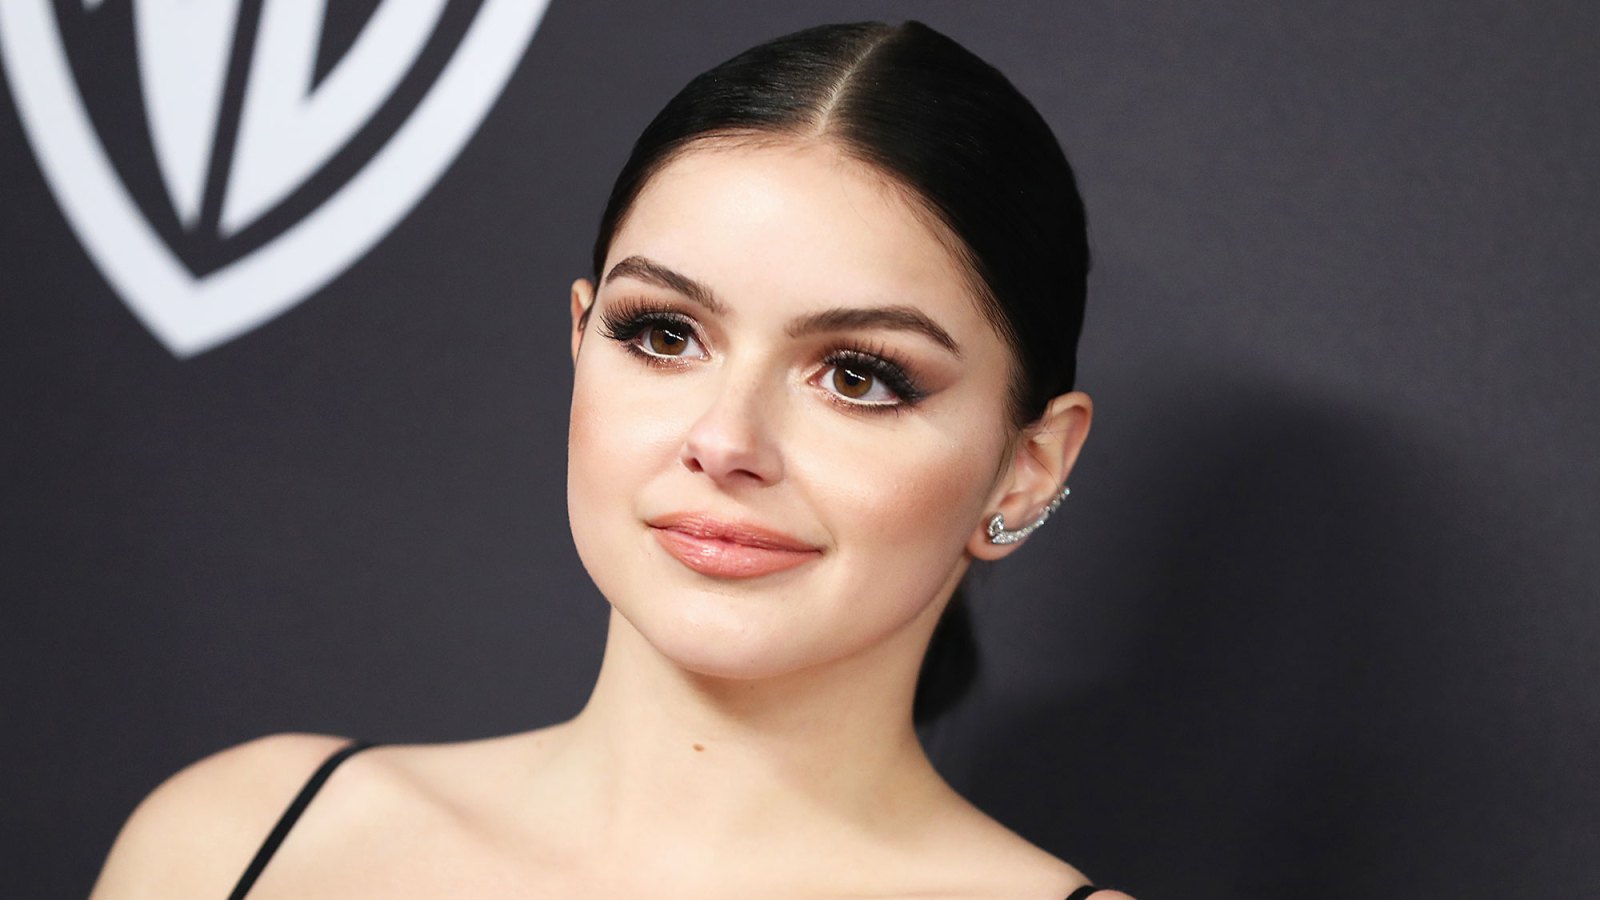 Ariel Winter Looks Fresh Faced and Beautiful Unretouched on Magazine Cover